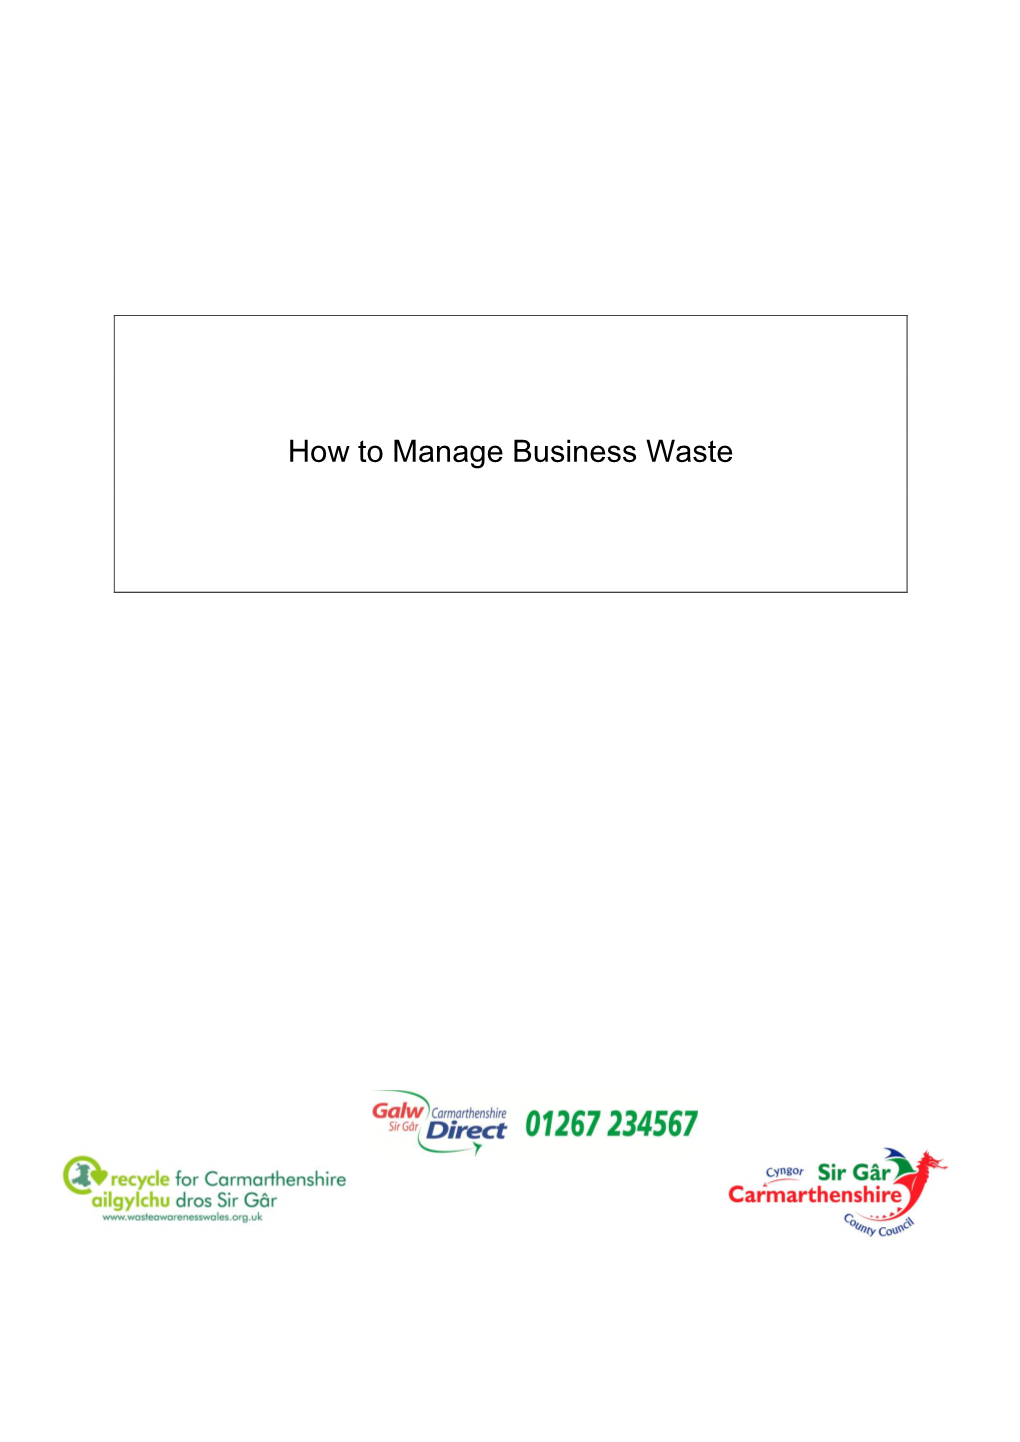 How to Manage Business Waste